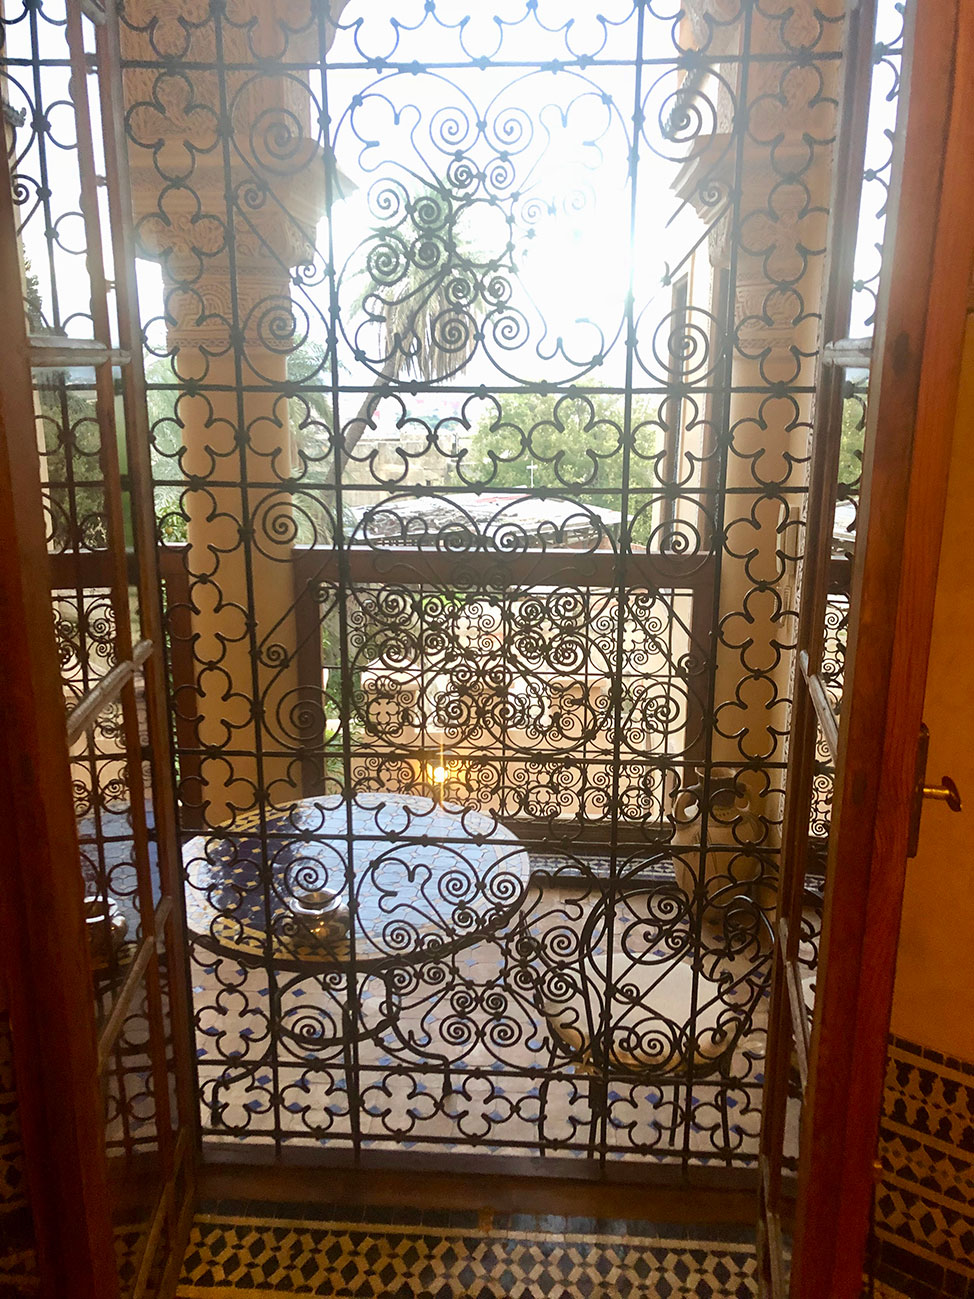 Looking onto a sunny terrace from behind a window covered by decorative wrought iron.